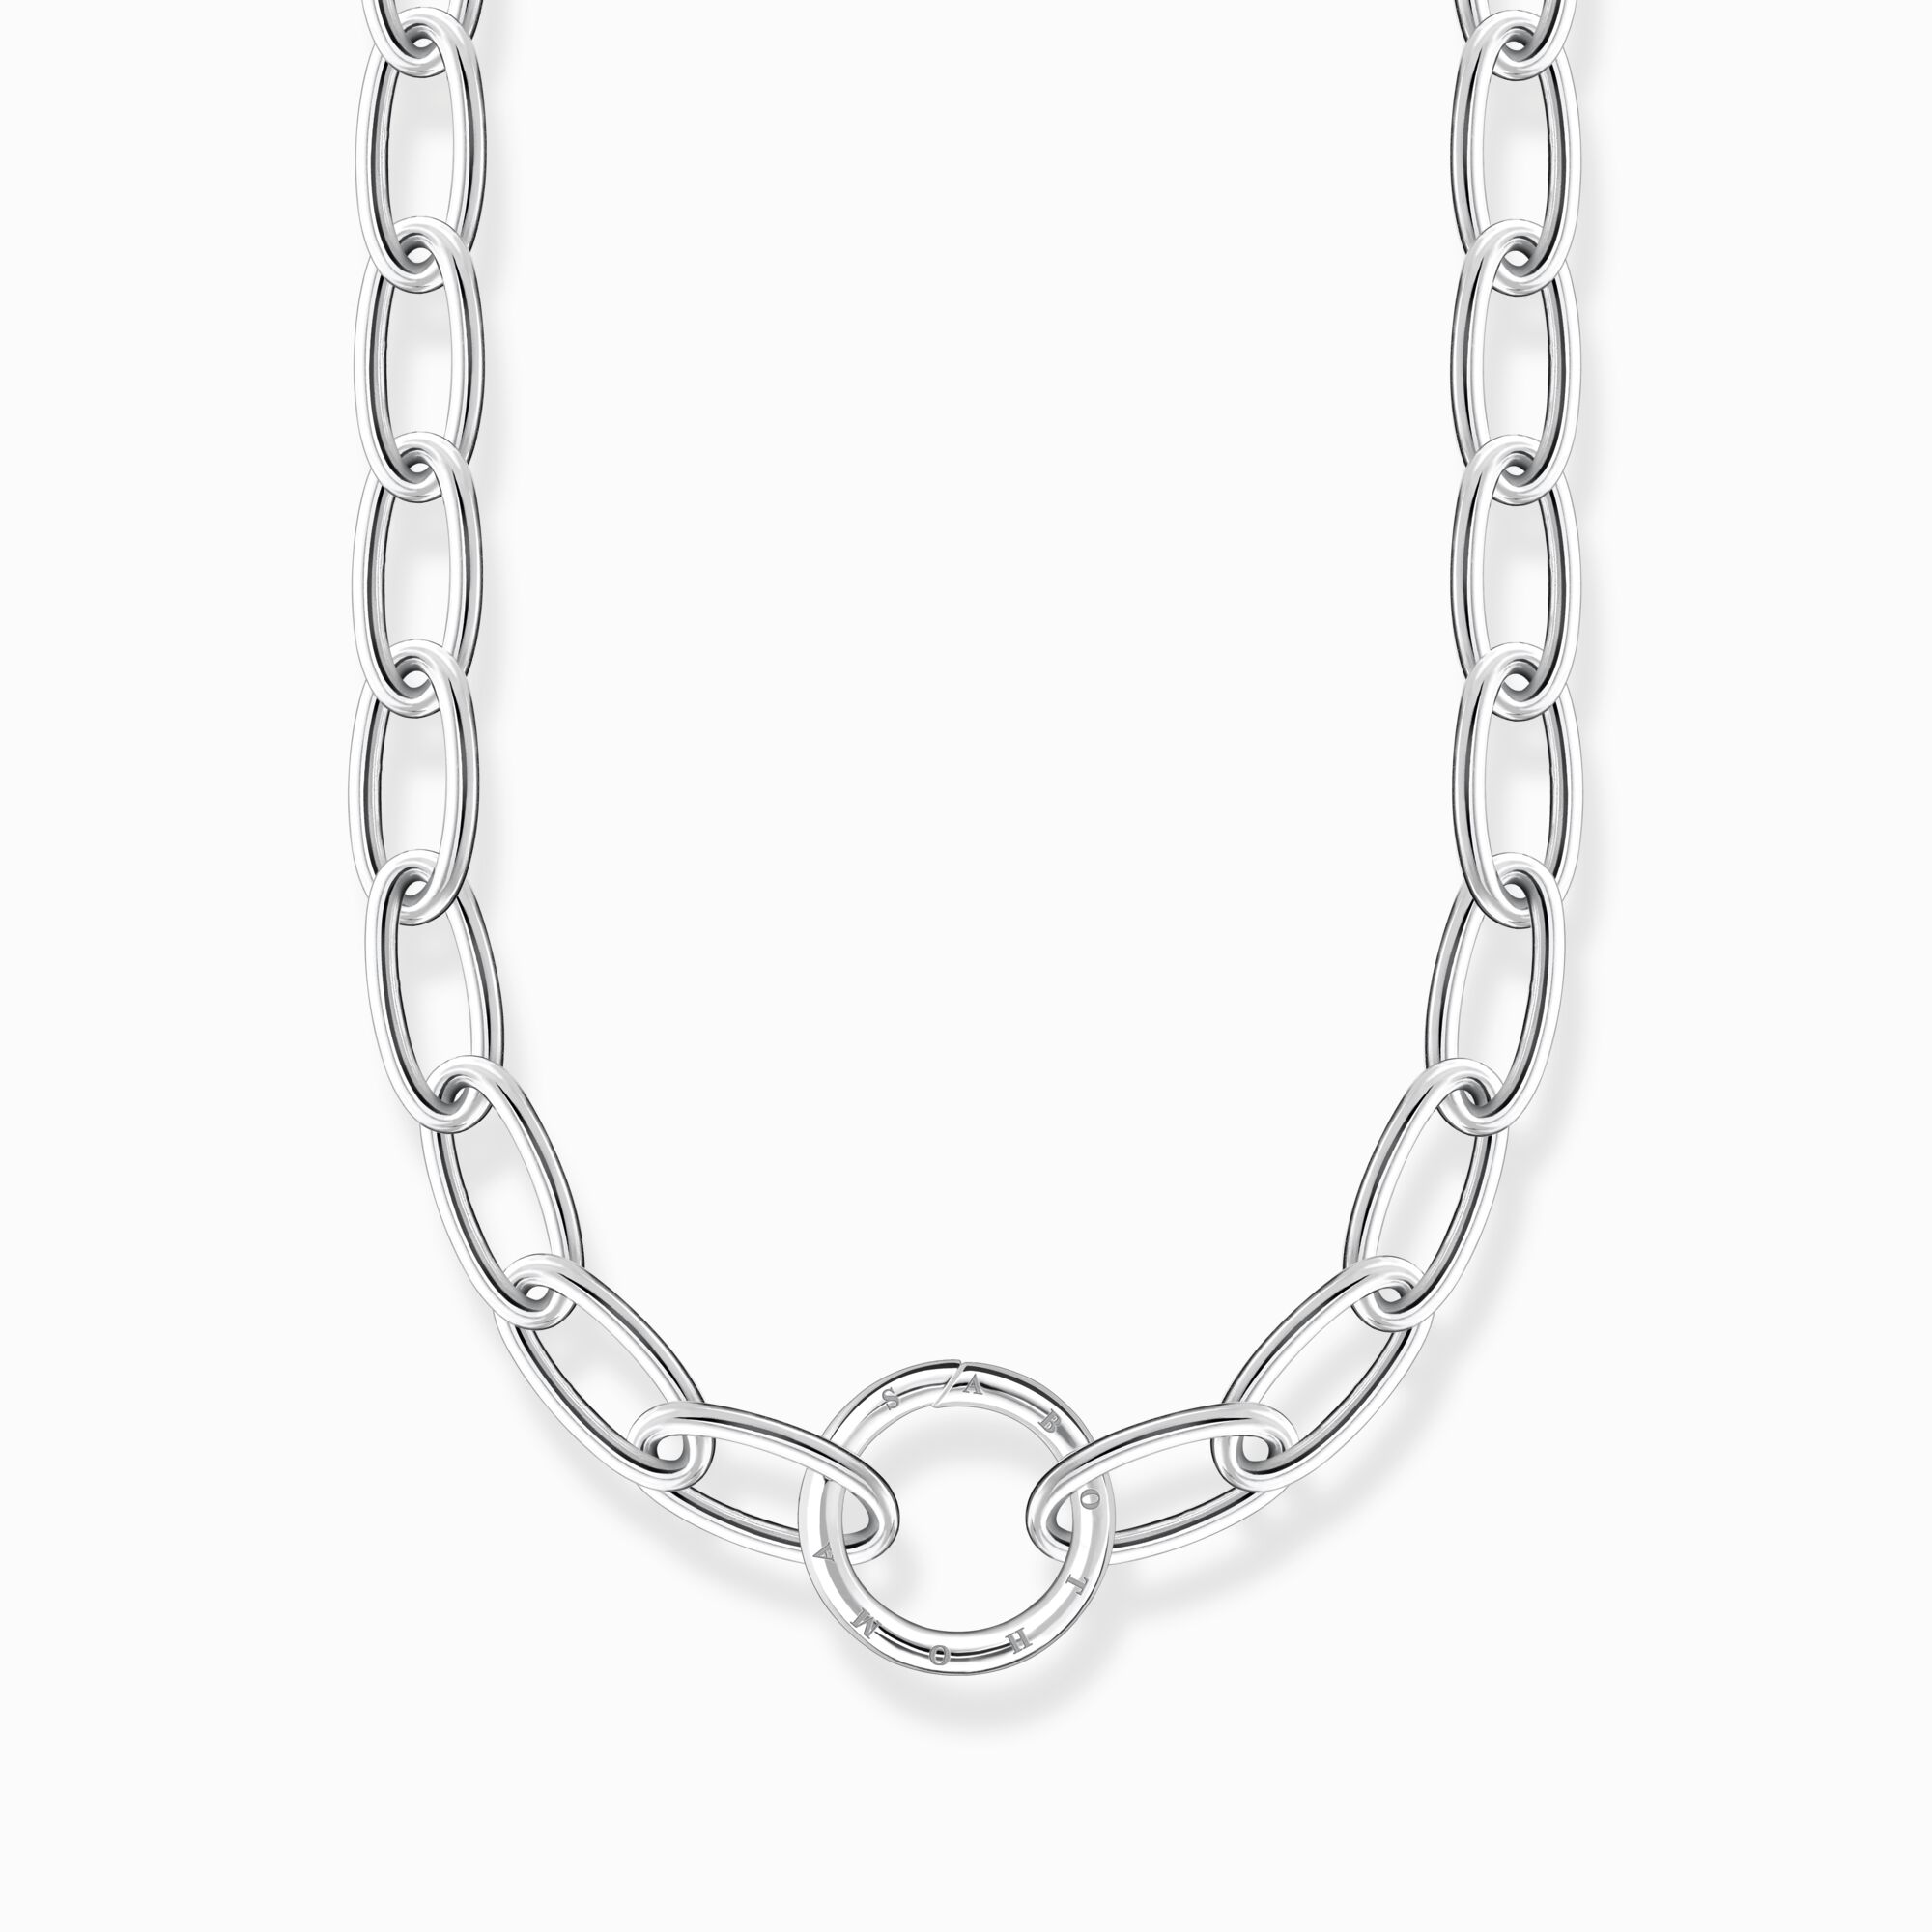 Chain necklace for women with ring clasp – THOMAS SABO